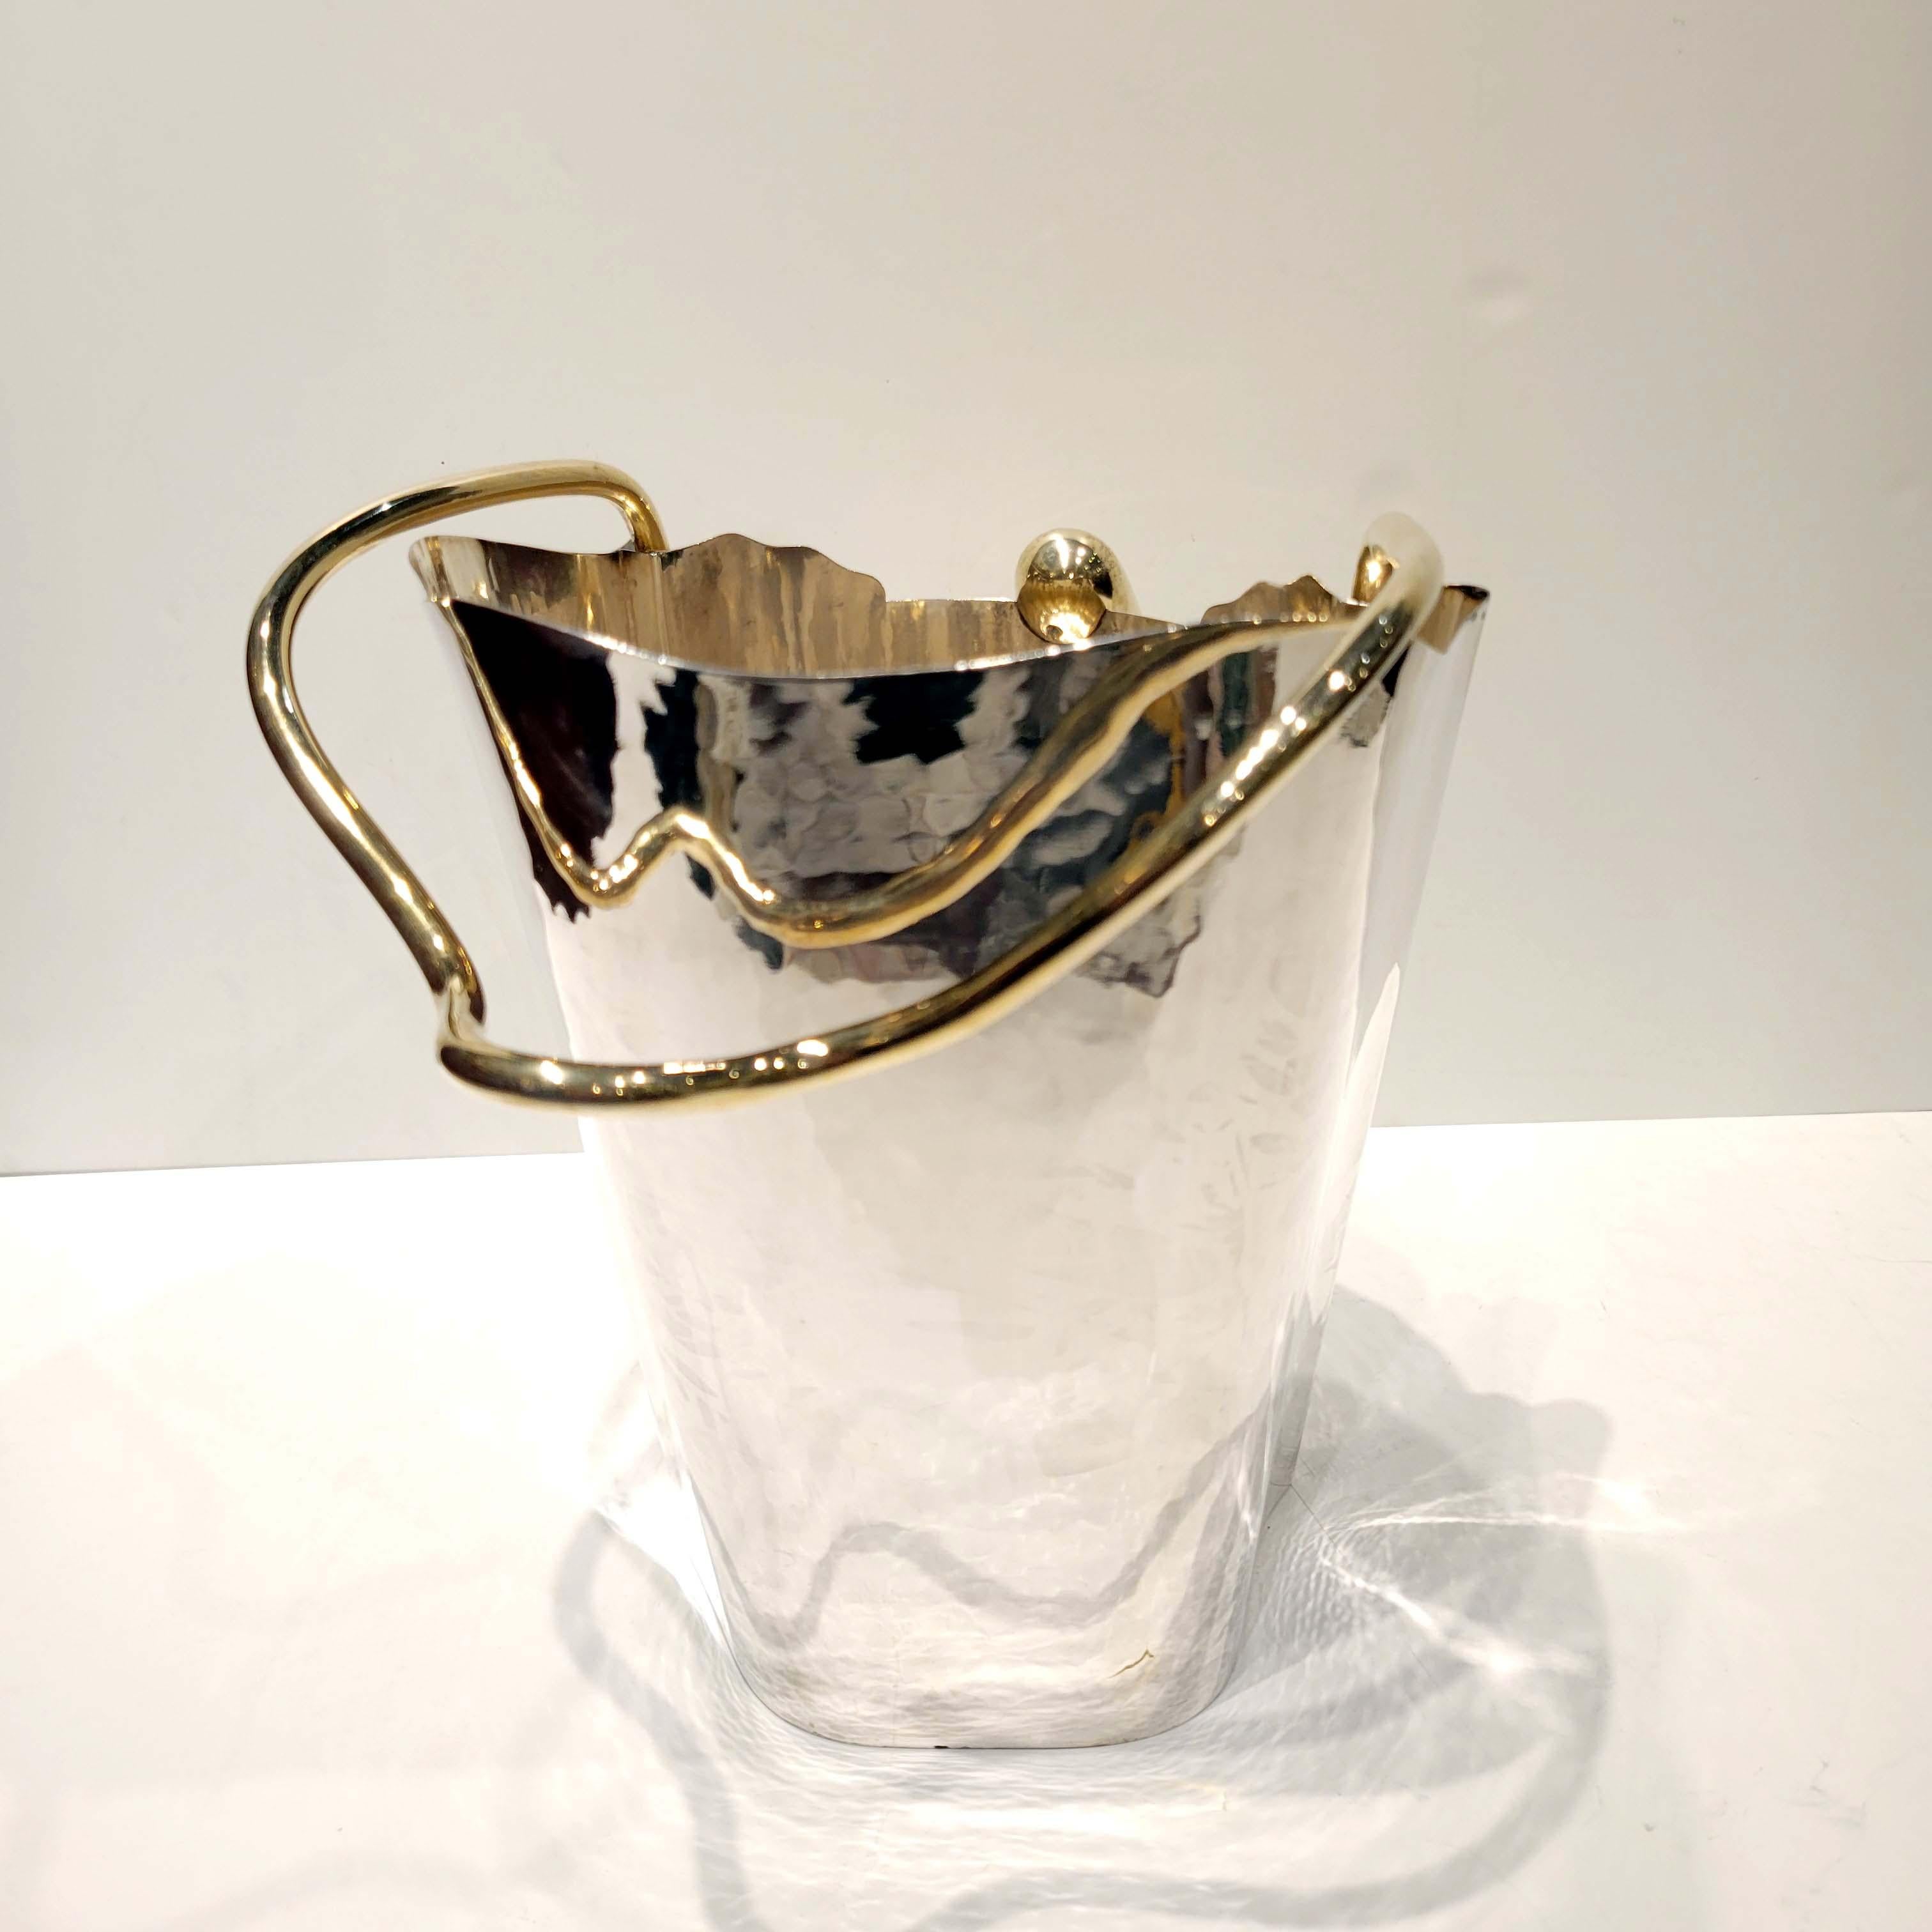 Sterling silver, partly gold plated ice/ champagne bucket Designed by Borek Sipek for Cleto Munari. Edition: 8/99. Hand hammered sterling silver . Approximate weight, 48 Troy Ounces. 
Biography. Boris Sipek was born in Prague, Czechoslovakia in